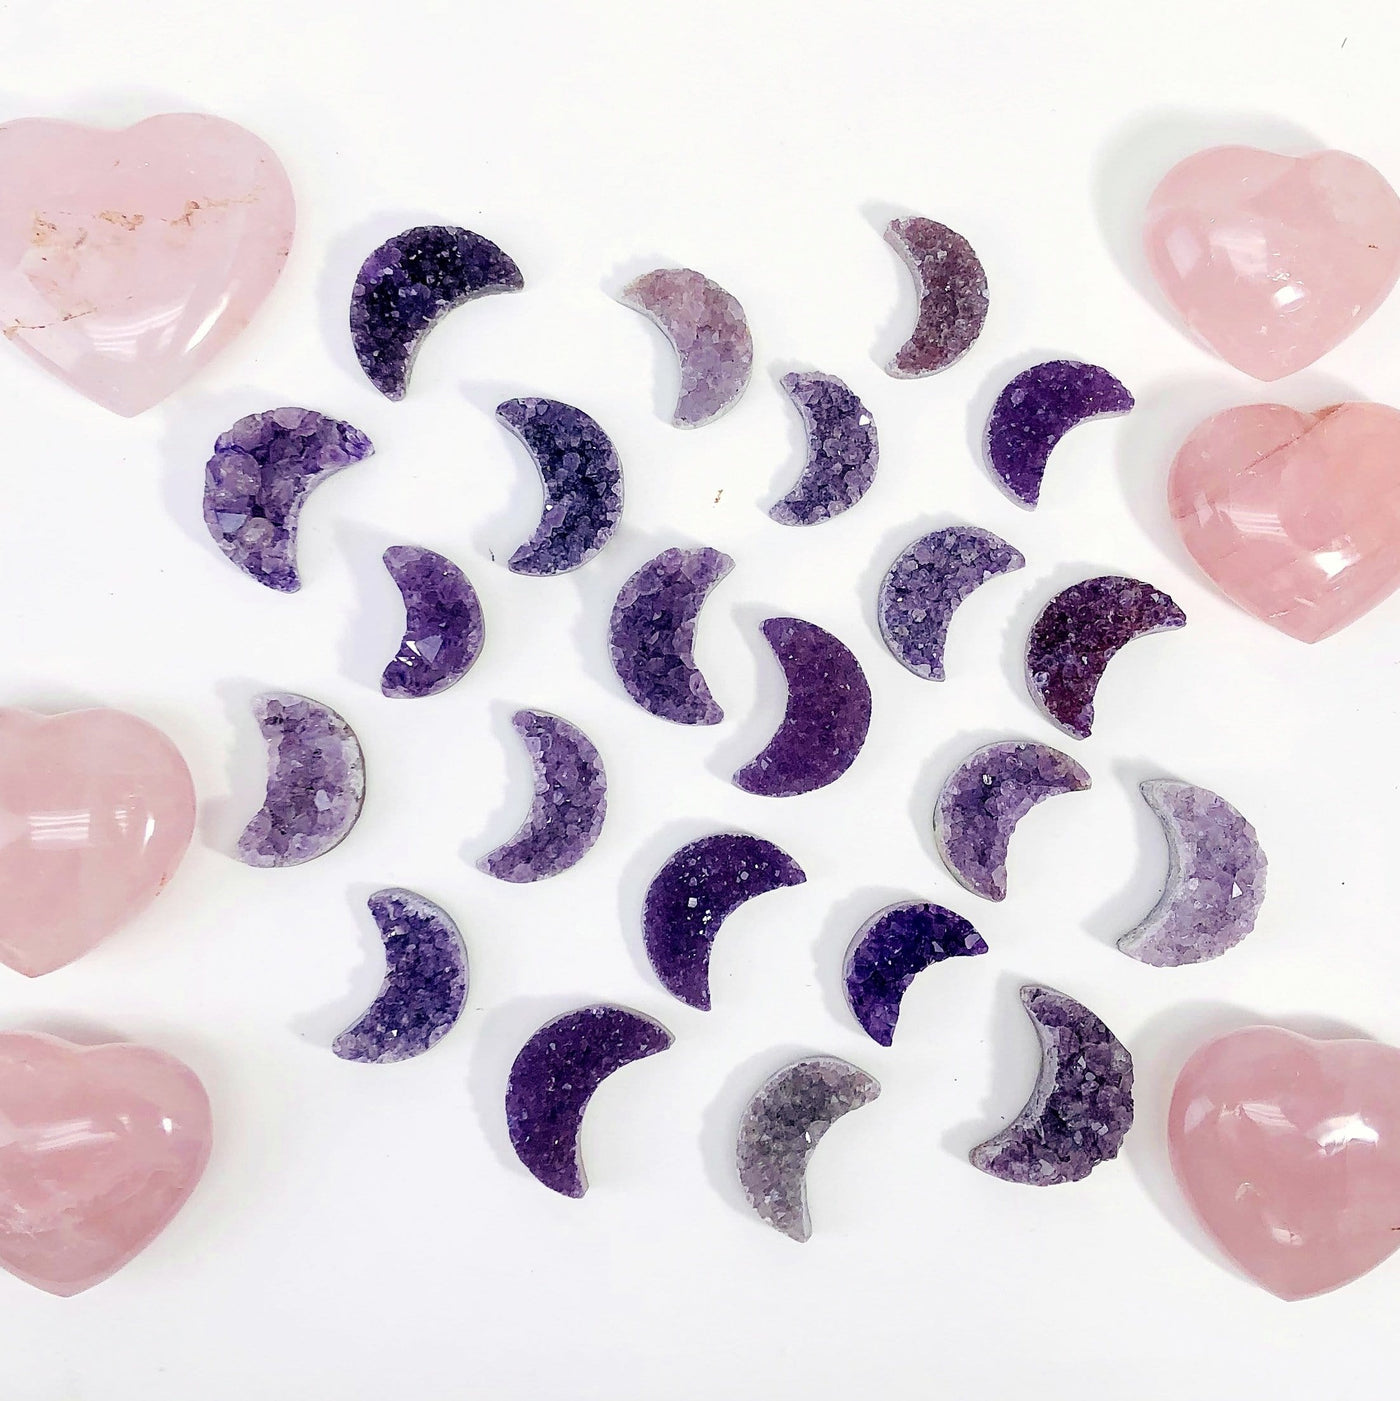 multiple Amethyst Druzy Moon Crescent UNDRILLED Cabochons displayed to show various colors textures sizes and characteristics on white background